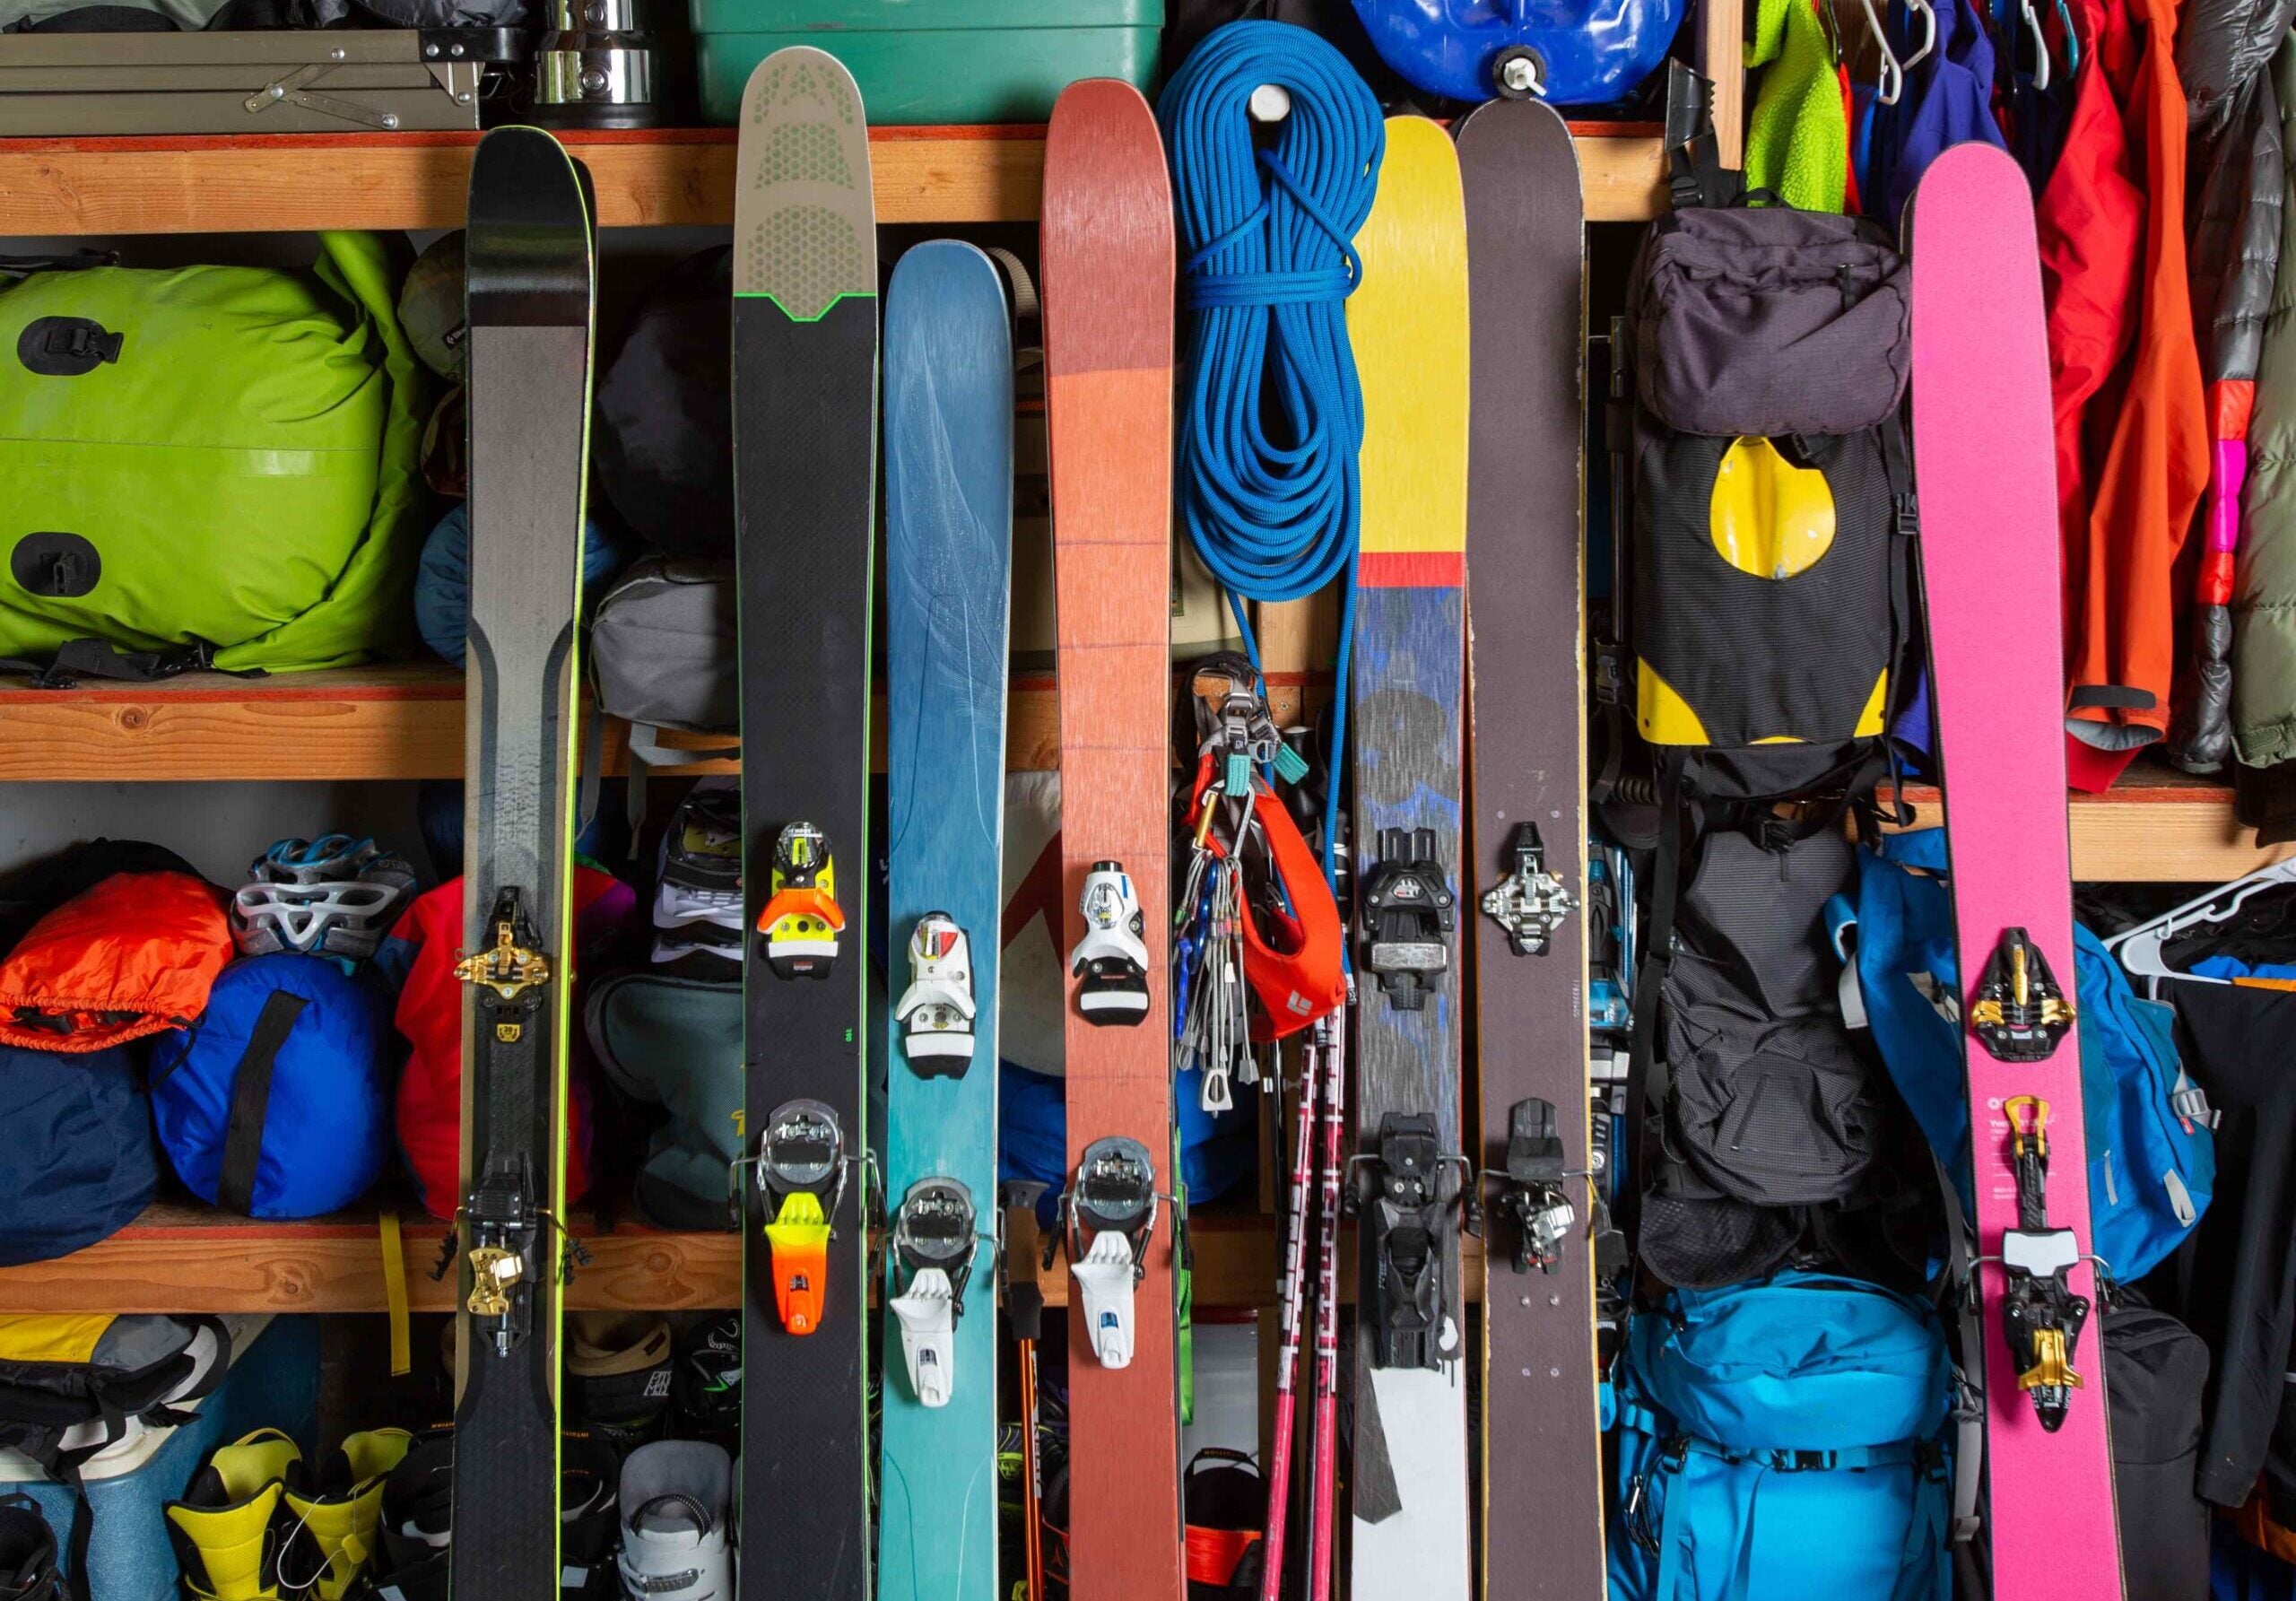 Buy and sell secondhand ski gear with WhoSki.com